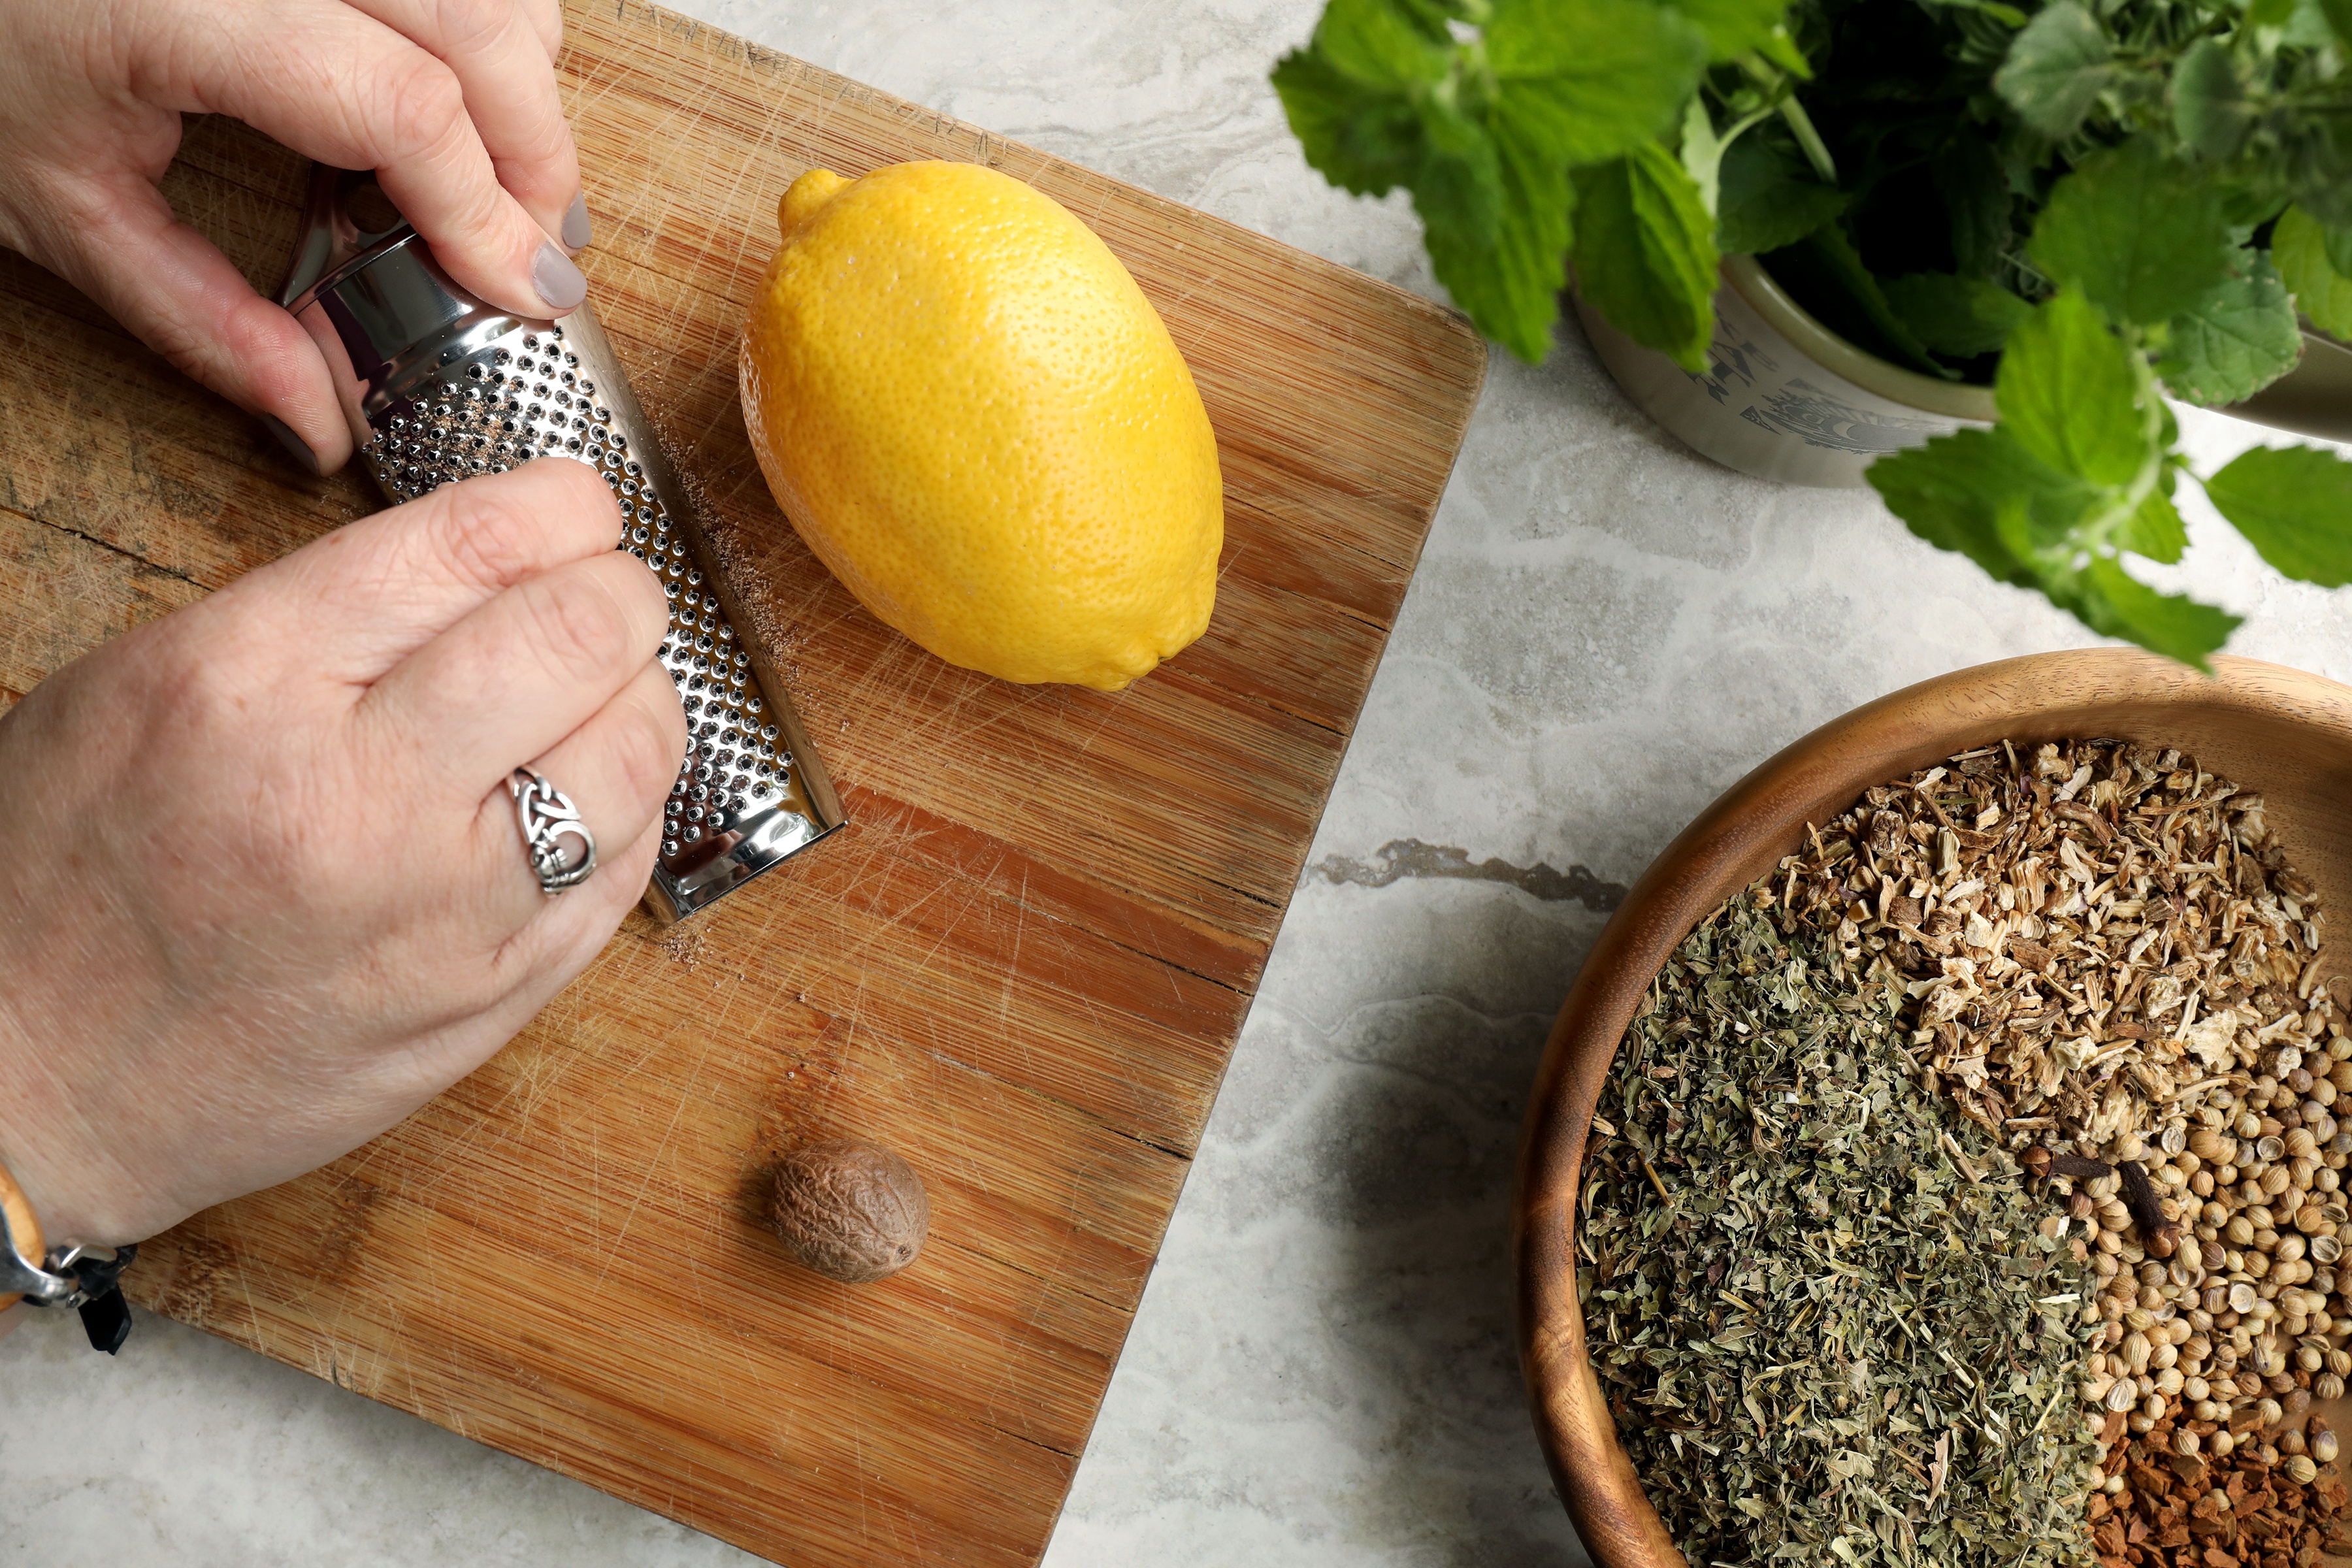 Hands grating nutmeg on wooden cutting board near lemon balm and lemon and dried herbs and spices.